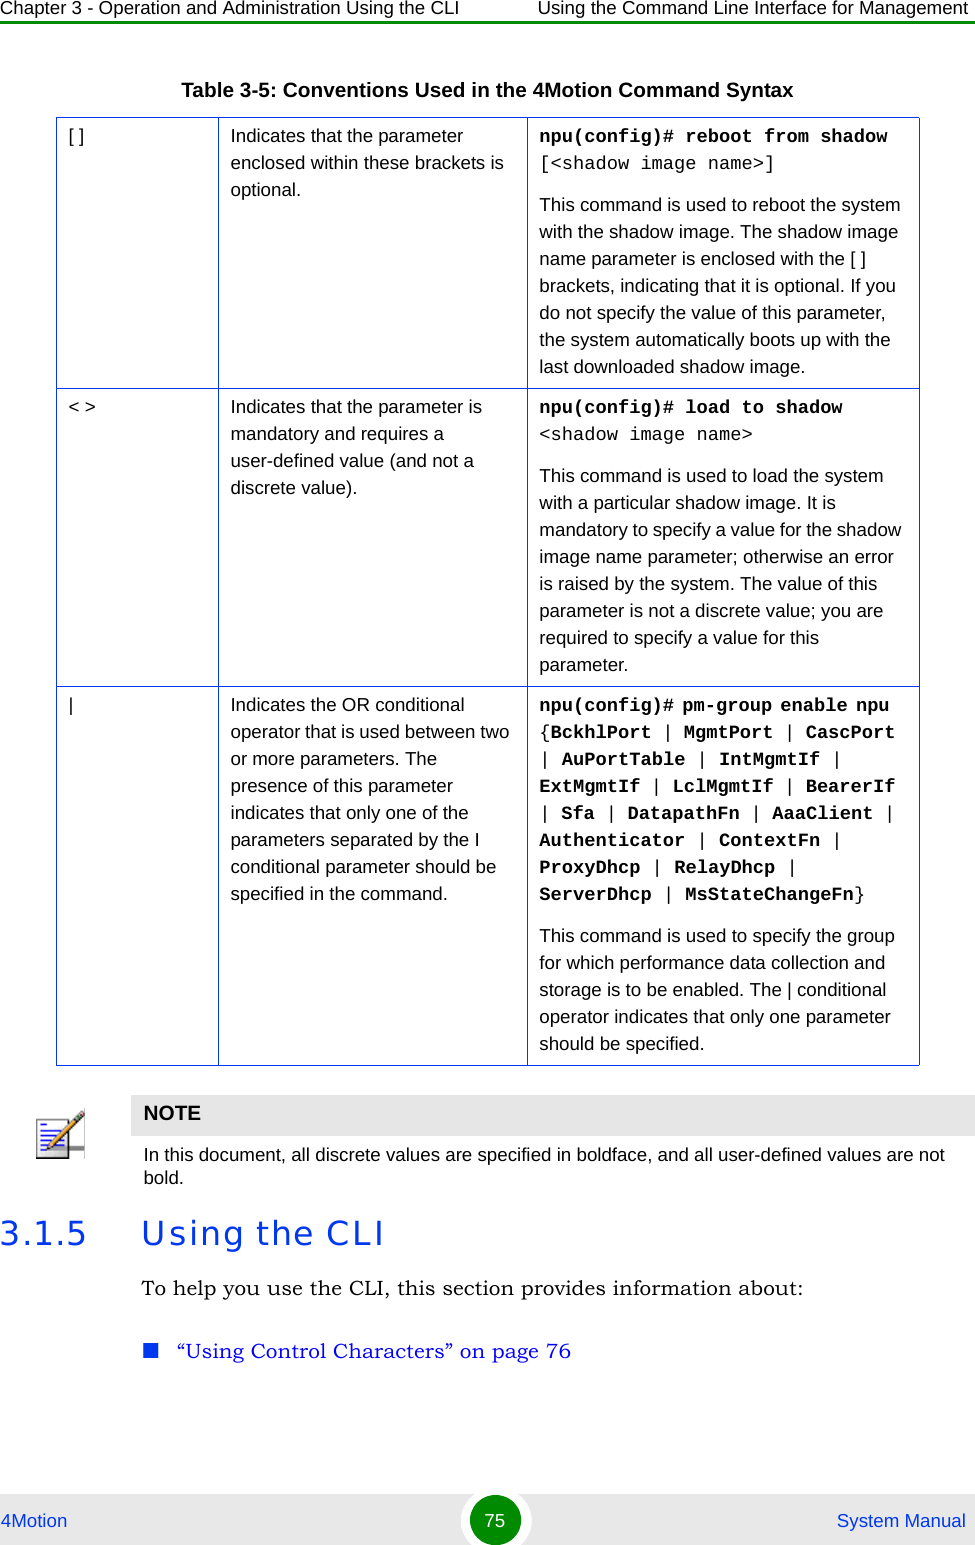 Chapter 3 - Operation and Administration Using the CLI Using the Command Line Interface for Management4Motion 75  System Manual3.1.5 Using the CLITo help you use the CLI, this section provides information about:“Using Control Characters” on page 76[ ] Indicates that the parameter enclosed within these brackets is optional.npu(config)# reboot from shadow [&lt;shadow image name&gt;]This command is used to reboot the system with the shadow image. The shadow image name parameter is enclosed with the [ ] brackets, indicating that it is optional. If you do not specify the value of this parameter, the system automatically boots up with the last downloaded shadow image.&lt; &gt; Indicates that the parameter is mandatory and requires a user-defined value (and not a discrete value).npu(config)# load to shadow &lt;shadow image name&gt;This command is used to load the system with a particular shadow image. It is mandatory to specify a value for the shadow image name parameter; otherwise an error is raised by the system. The value of this parameter is not a discrete value; you are required to specify a value for this parameter.| Indicates the OR conditional operator that is used between two or more parameters. The presence of this parameter indicates that only one of the parameters separated by the I conditional parameter should be specified in the command.npu(config)# pm-group enable npu  {BckhlPort | MgmtPort | CascPort | AuPortTable | IntMgmtIf | ExtMgmtIf | LclMgmtIf | BearerIf | Sfa | DatapathFn | AaaClient | Authenticator | ContextFn | ProxyDhcp | RelayDhcp | ServerDhcp | MsStateChangeFn}This command is used to specify the group for which performance data collection and storage is to be enabled. The | conditional operator indicates that only one parameter should be specified.NOTEIn this document, all discrete values are specified in boldface, and all user-defined values are not bold.Table 3-5: Conventions Used in the 4Motion Command Syntax